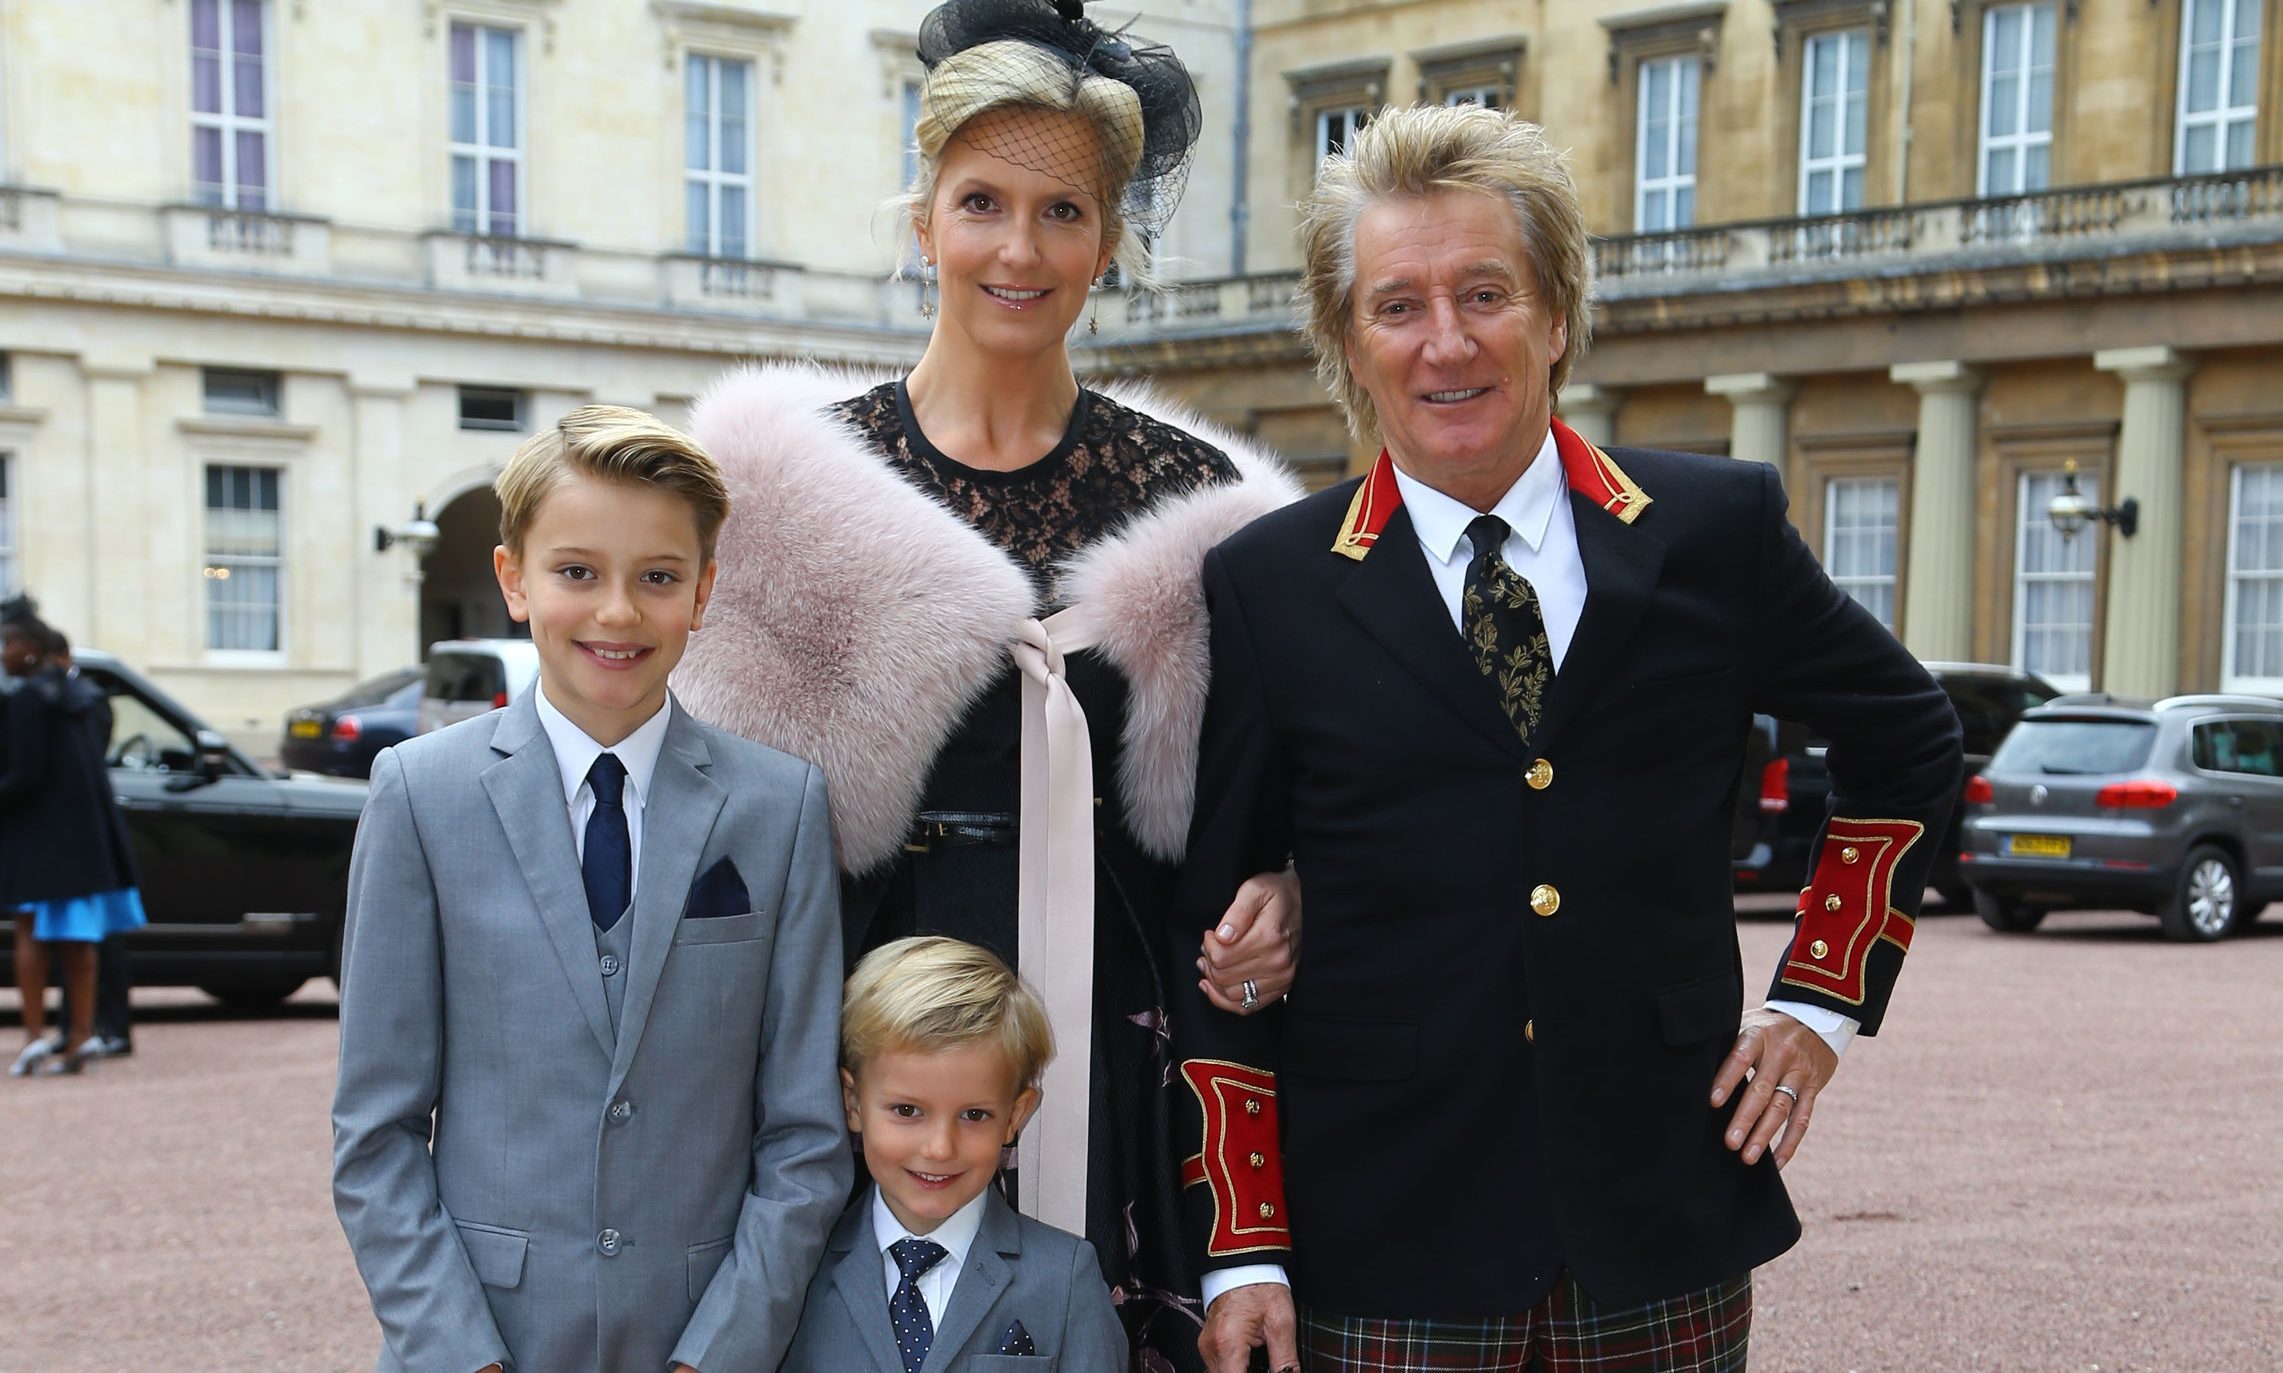 Sir Rod Stewart arriving at Buckingham Palace in London, with his wife, Penny Lancaster and children Alastair and Aiden (Gareth Fulller/PA Wire)